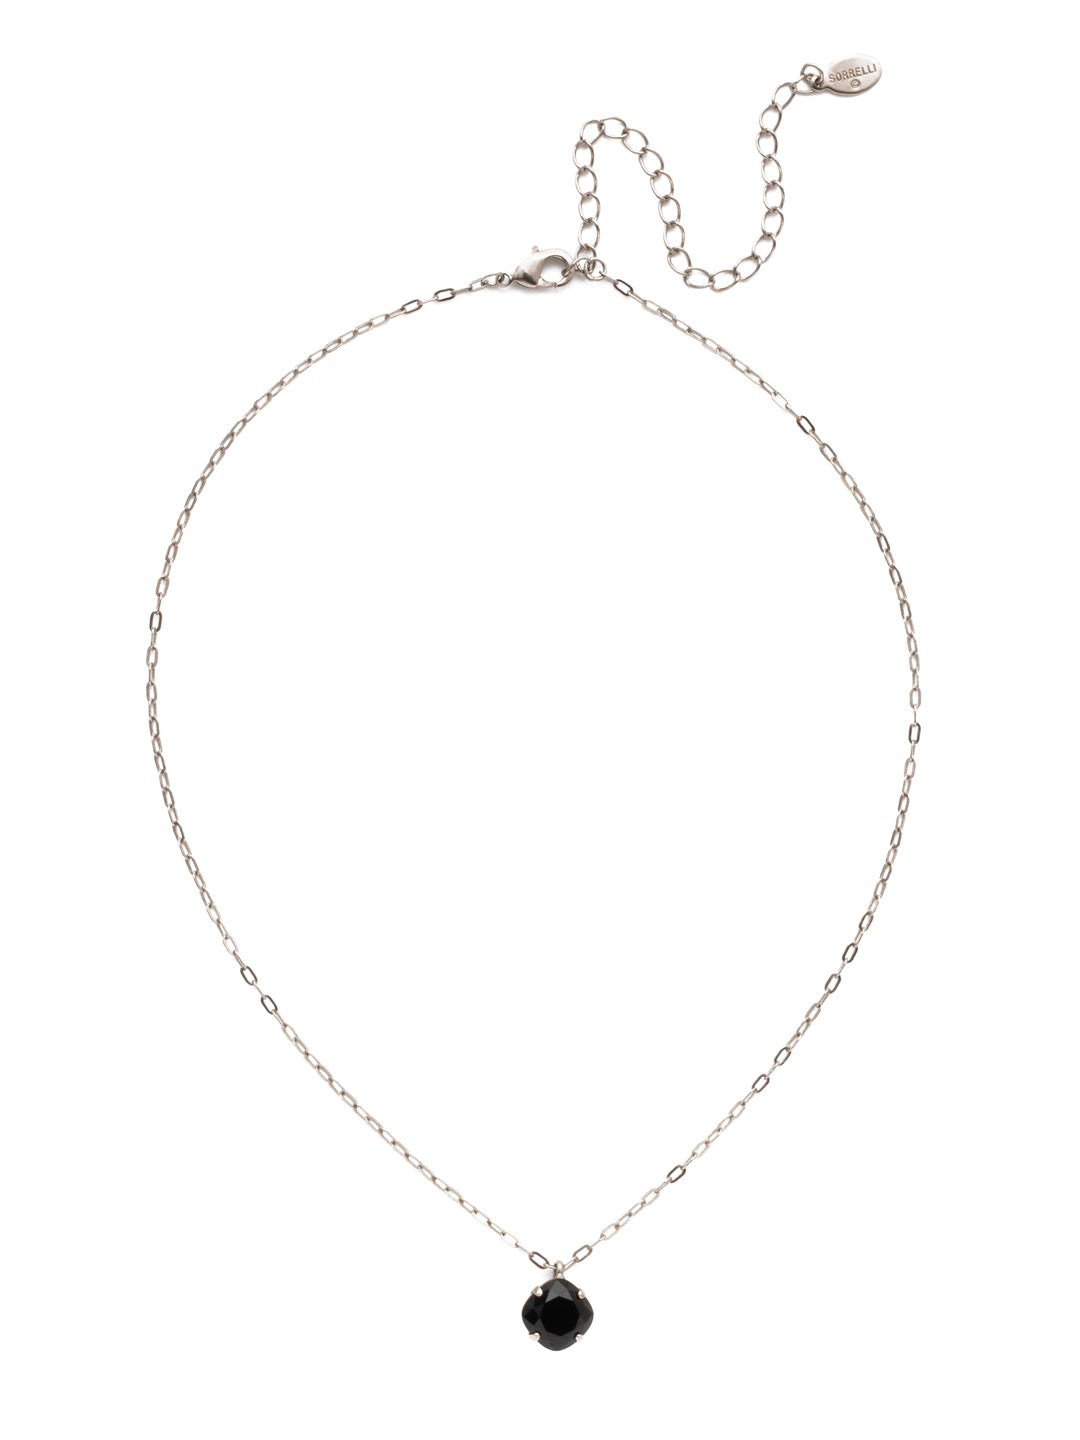 Siren Pendant Necklace - NEP22ASJET - With a cushion-cut crystal and delicate chain, the Siren Pendant  will add a litle sparkle to your everyday look. From Sorrelli's Jet collection in our Antique Silver-tone finish.